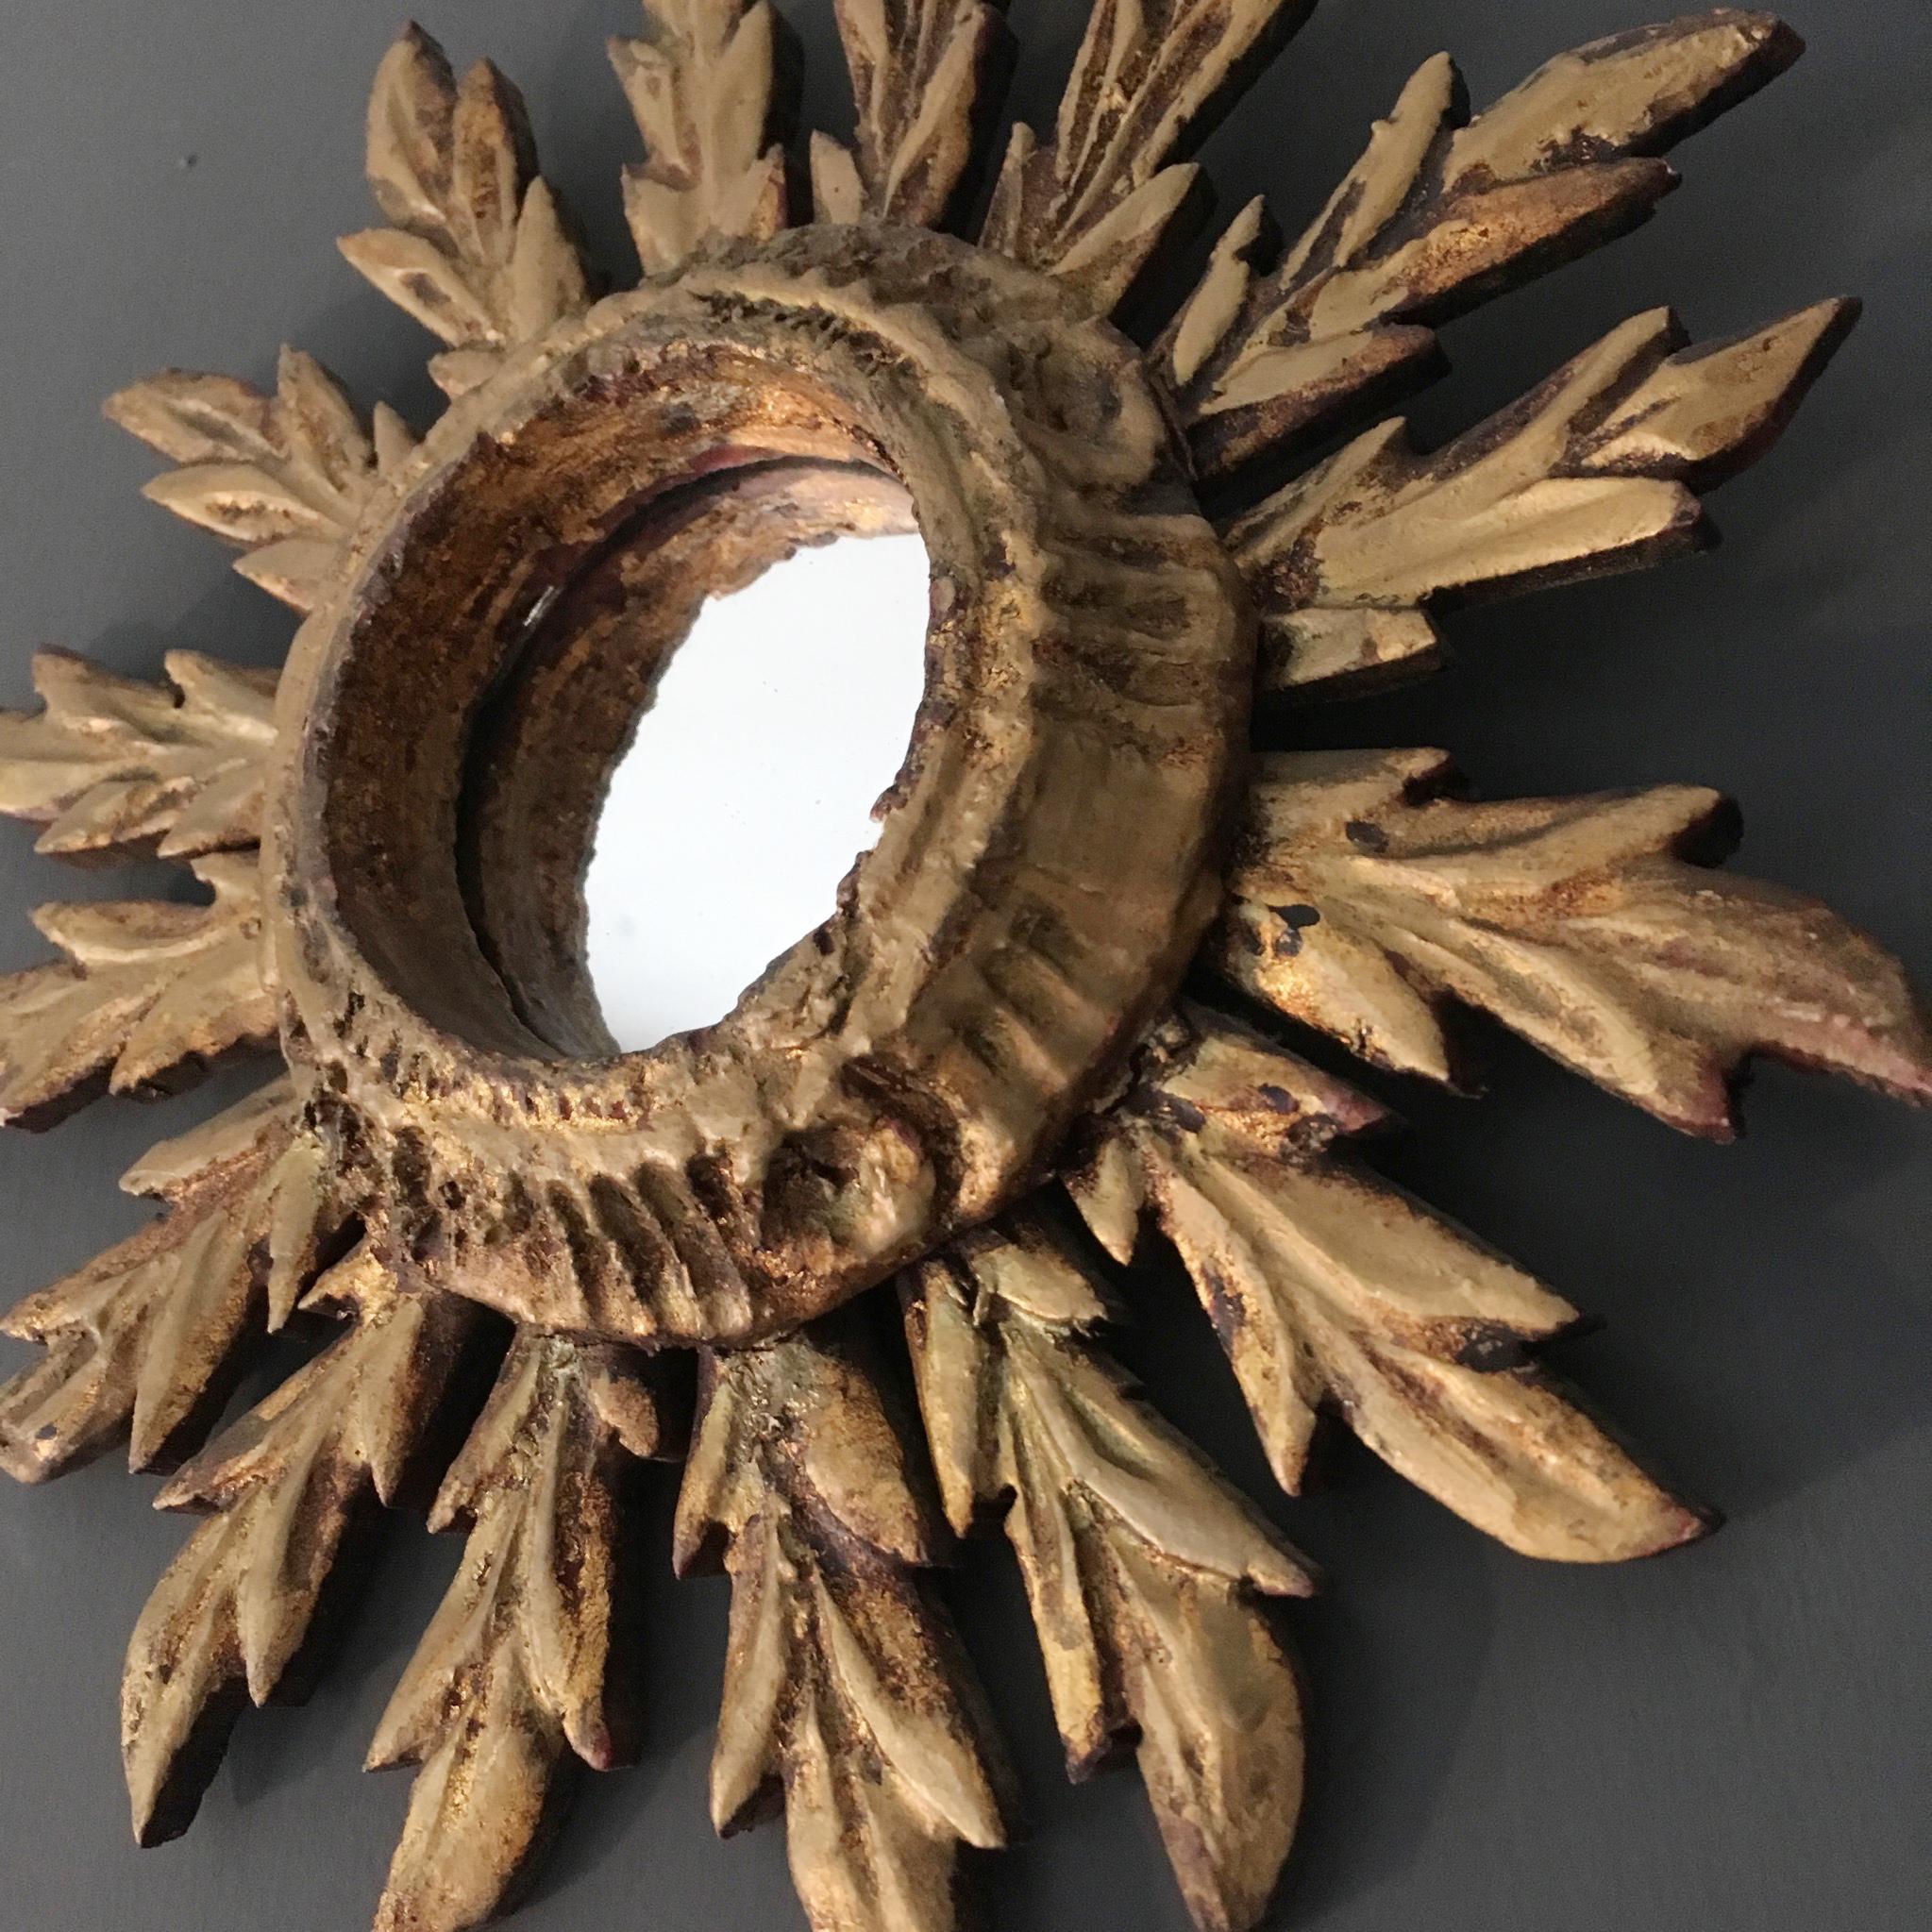 Spanish handcrafted wooden sunburst mirror

Rare small size

Feather shaped rays, 

circa 1950s

Hand carved wood with original gilt finish

Measures: 27 cm total width 
7.5 cm mirror width

Small hanging hook on reverse.